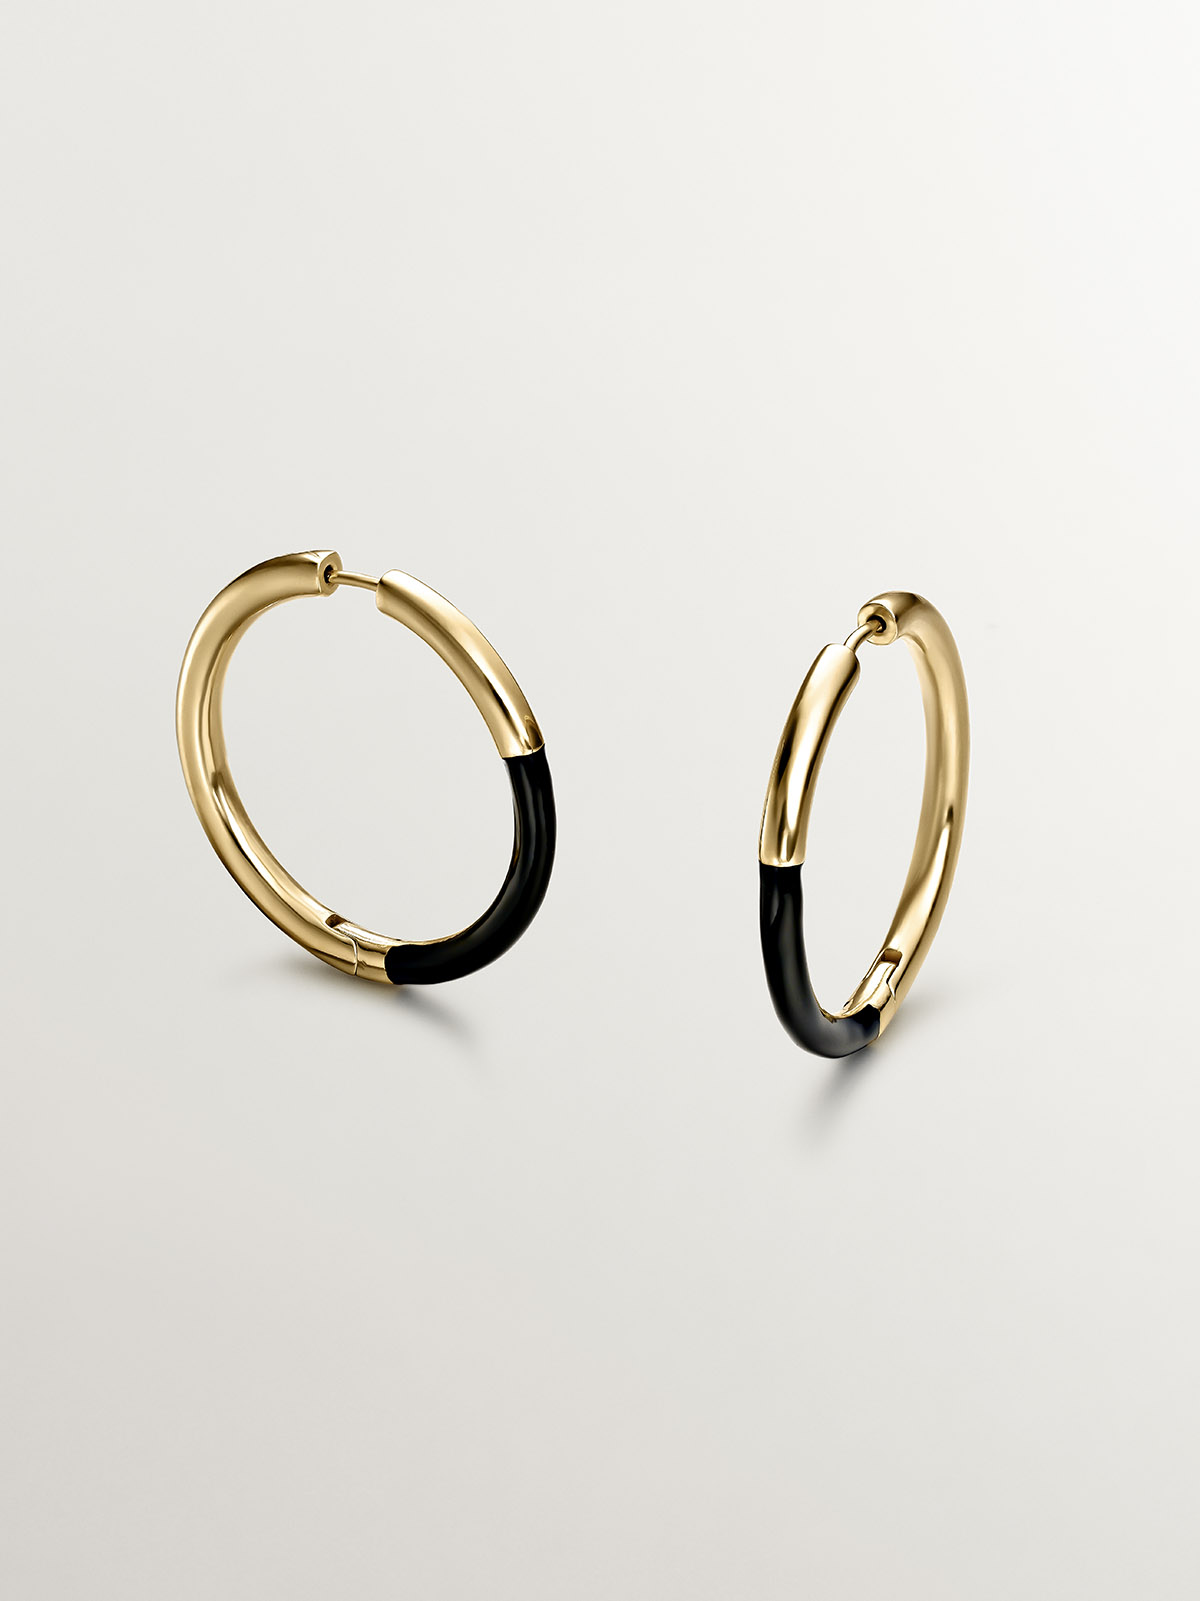 Large hoop earrings made of 925 silver, coated in 18K yellow gold with black enamel